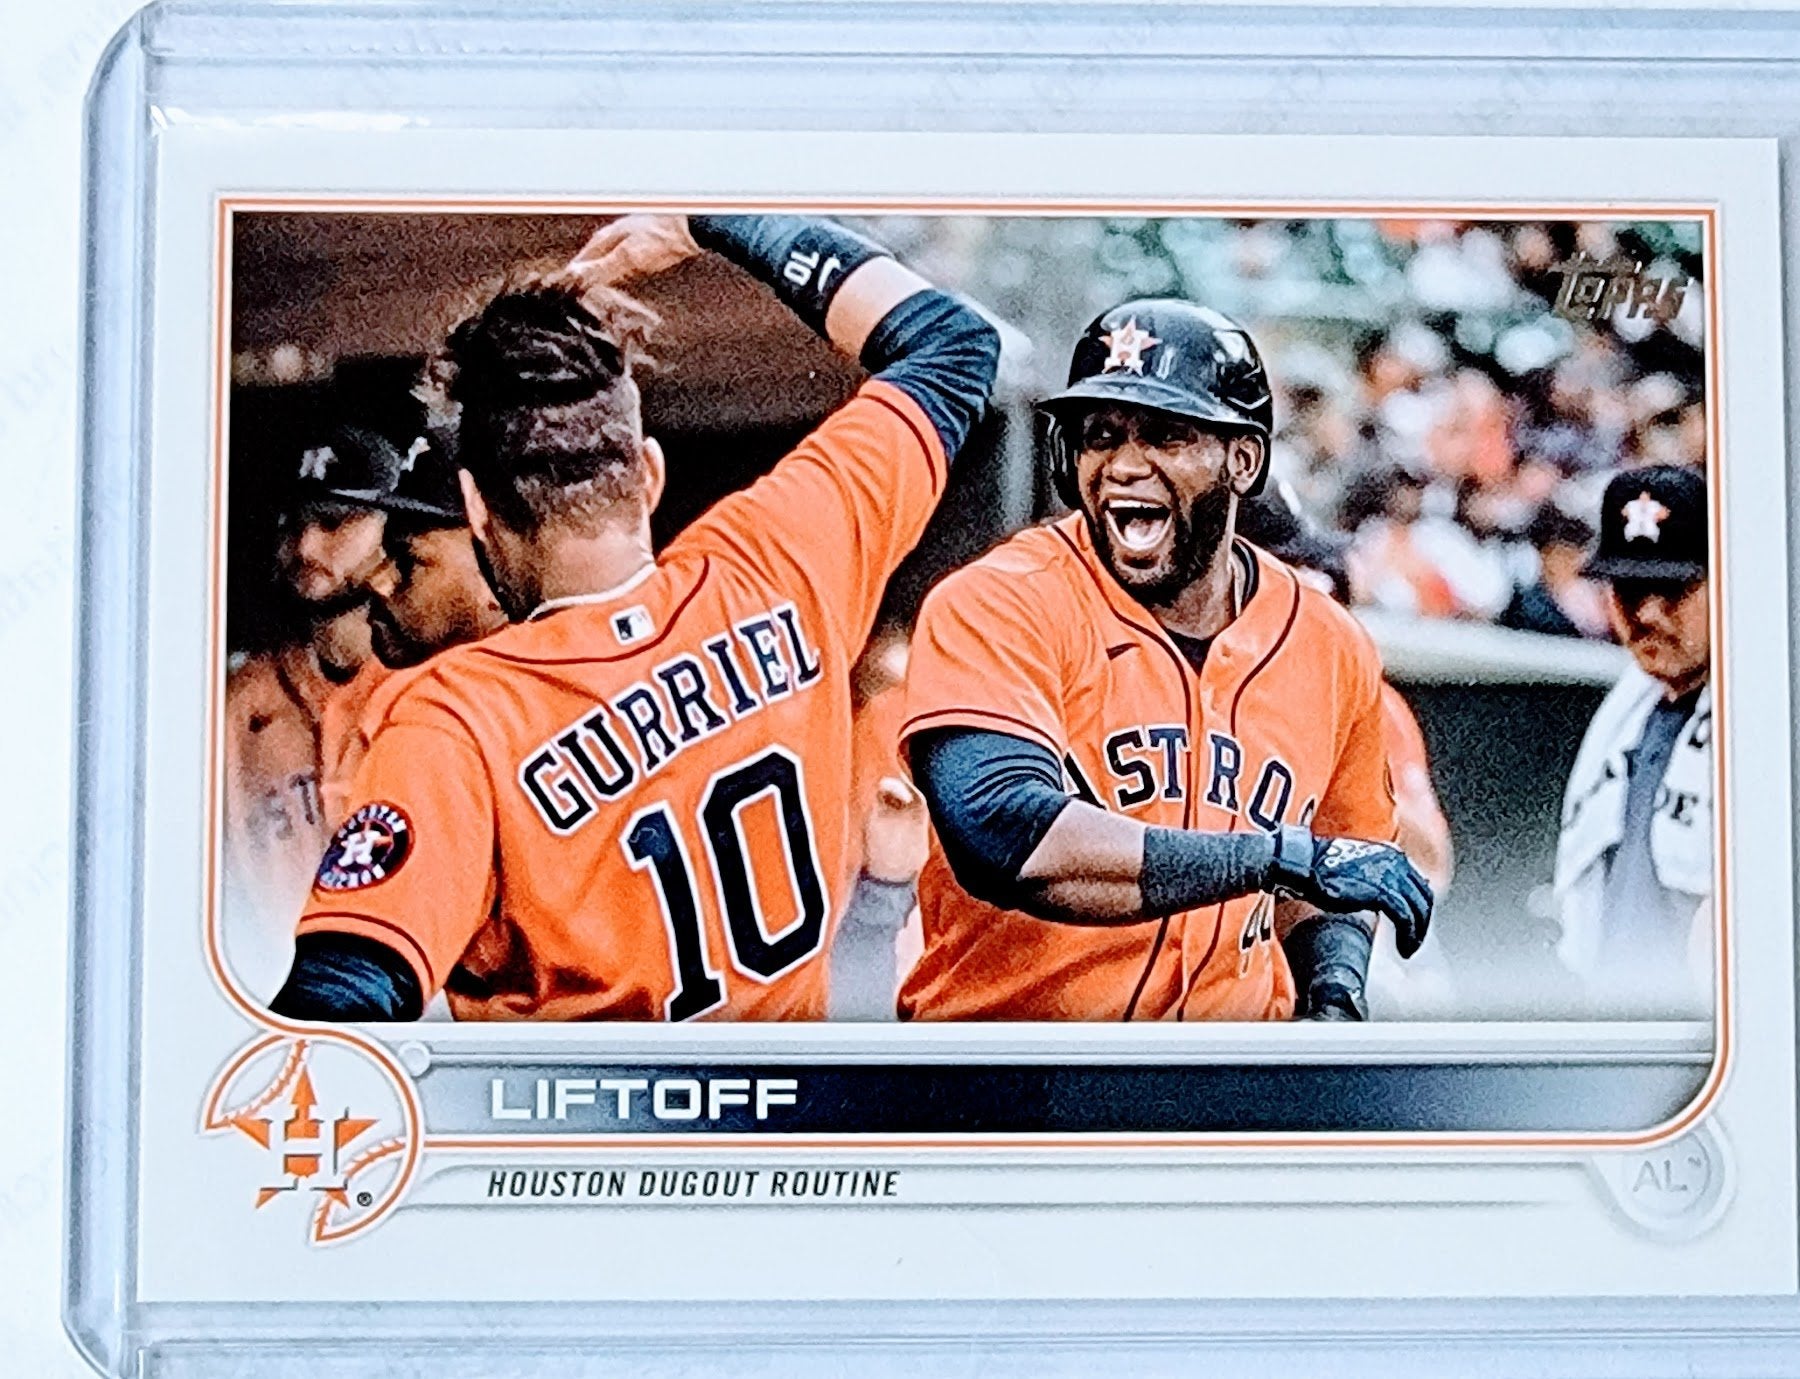 2022 Topps Houston Astros Liftoff Baseball Trading Card GRB1 simple Xclusive Collectibles   